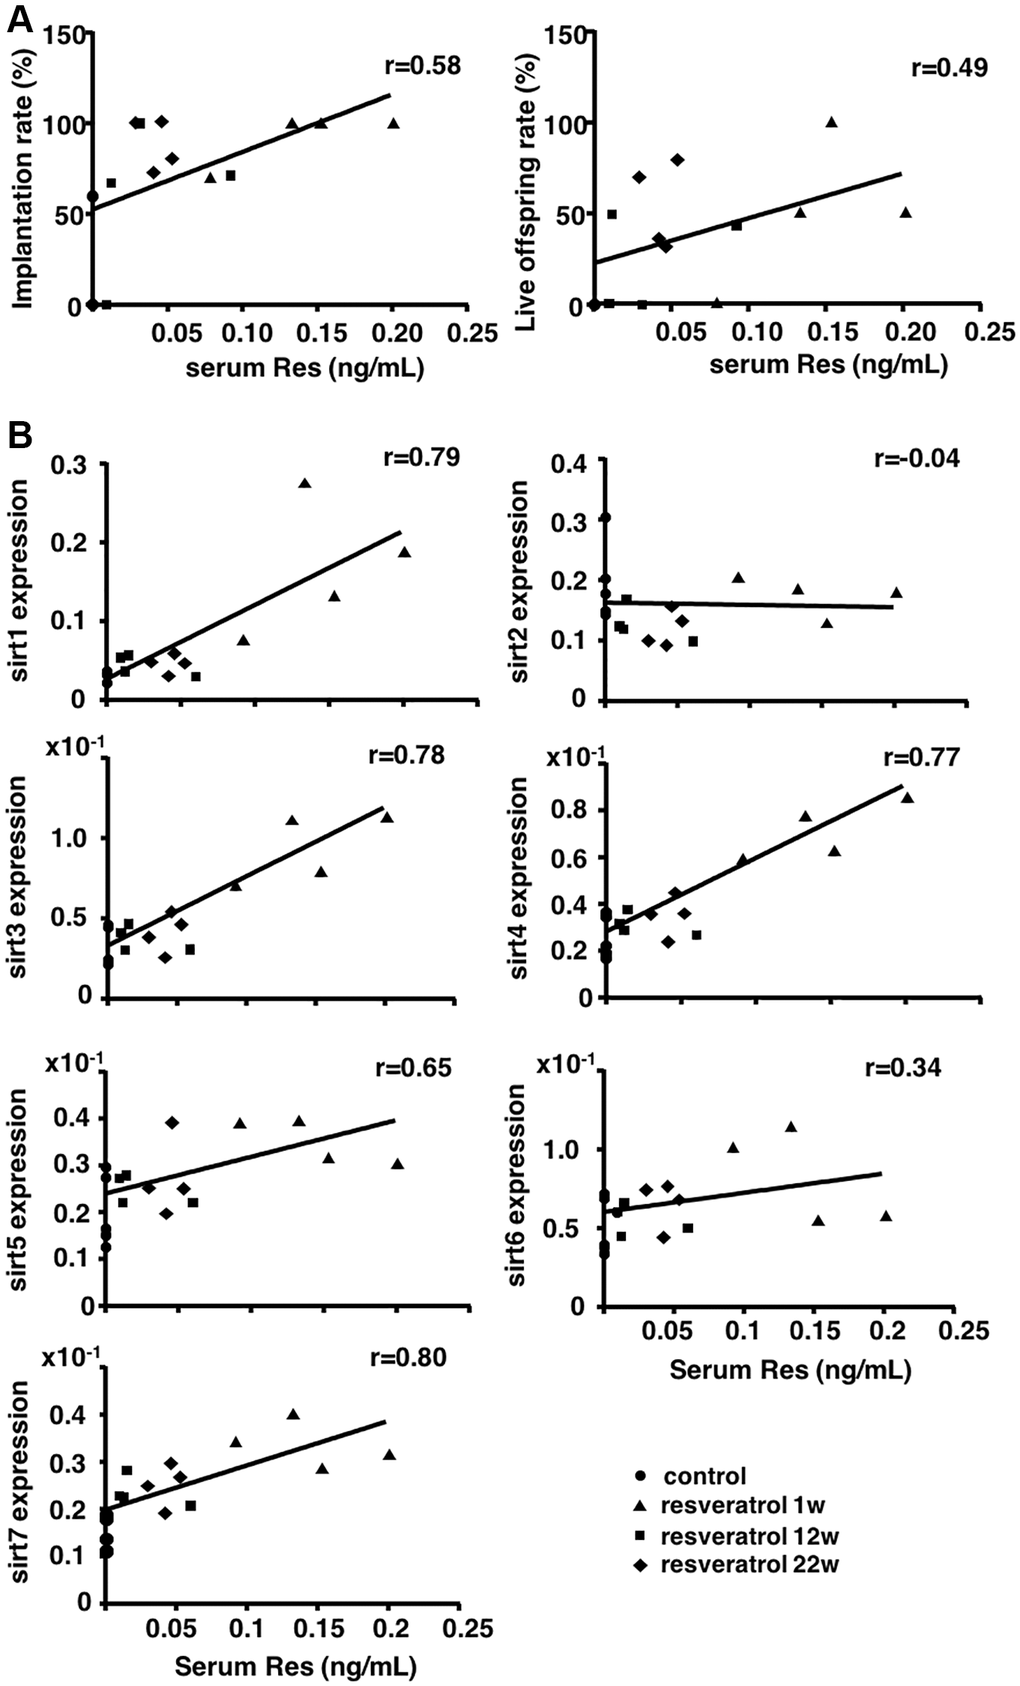 Correlation between serum resveratrol levels and the rates of implantation and live offspring, and ovarian transcript levels of Sirtuin family. Serum resveratrol (Res) levels from all groups were measured using HPLC-MS/MS. (A) Correlation of serum resveratrol levels with implantation and live offspring rates (n = 16 animals). (B) Correlation of serum resveratrol levels with ovarian mRNA expression levels of Sirtuin family genes (n = 16 animals). The correlation coefficient (r) above 0.4 indicated a significant correlation.